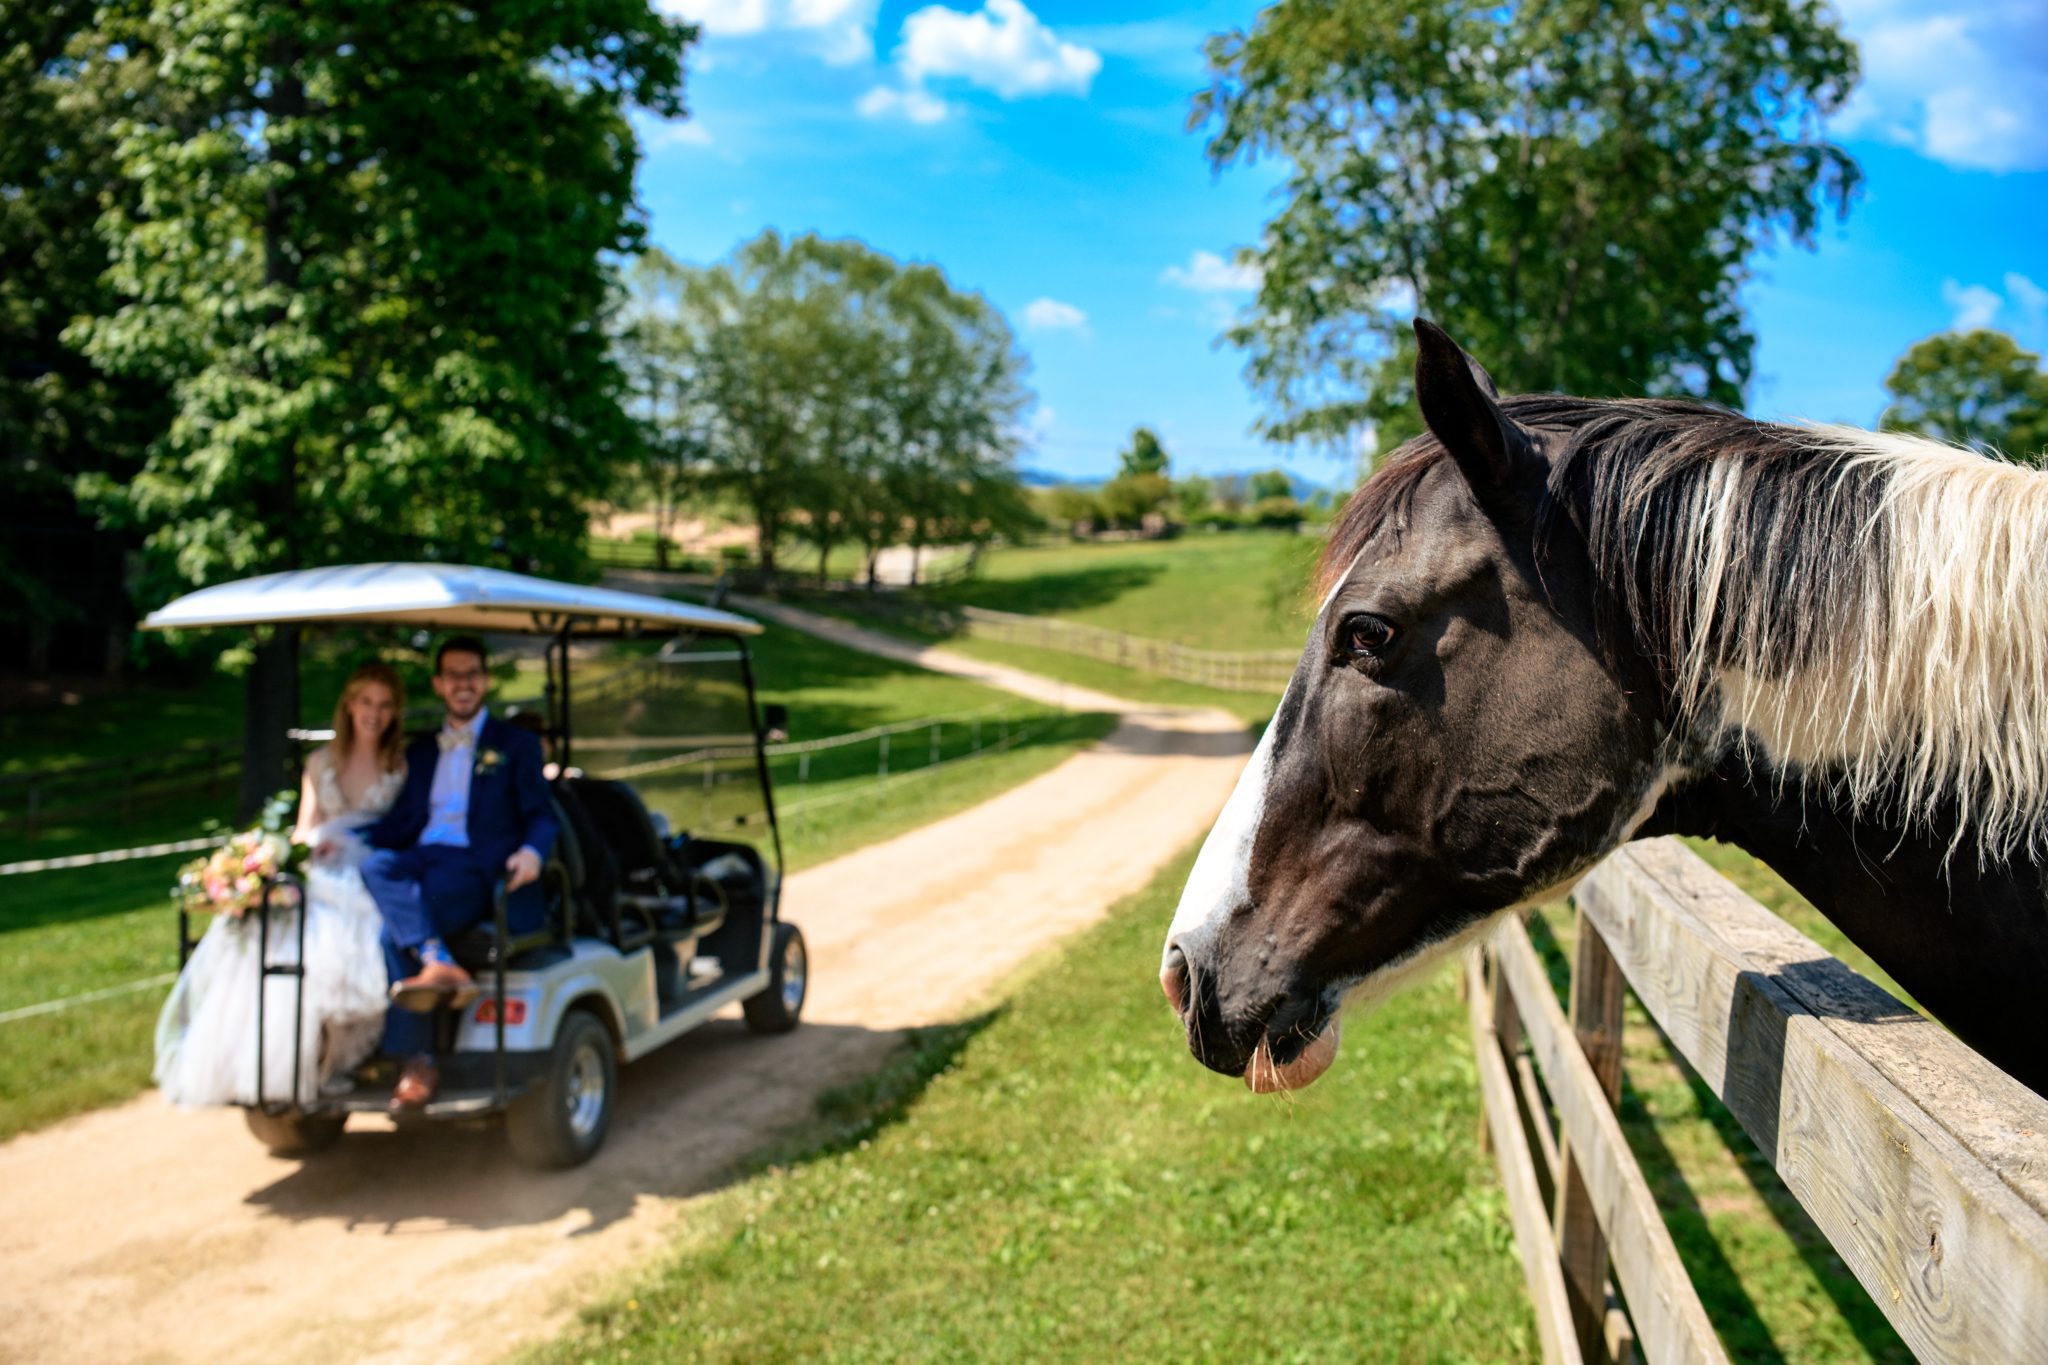 Horse watching bride and groom go by on a golf cart at a wedding at the farm in Candler North Carolina shot while being a second photographer